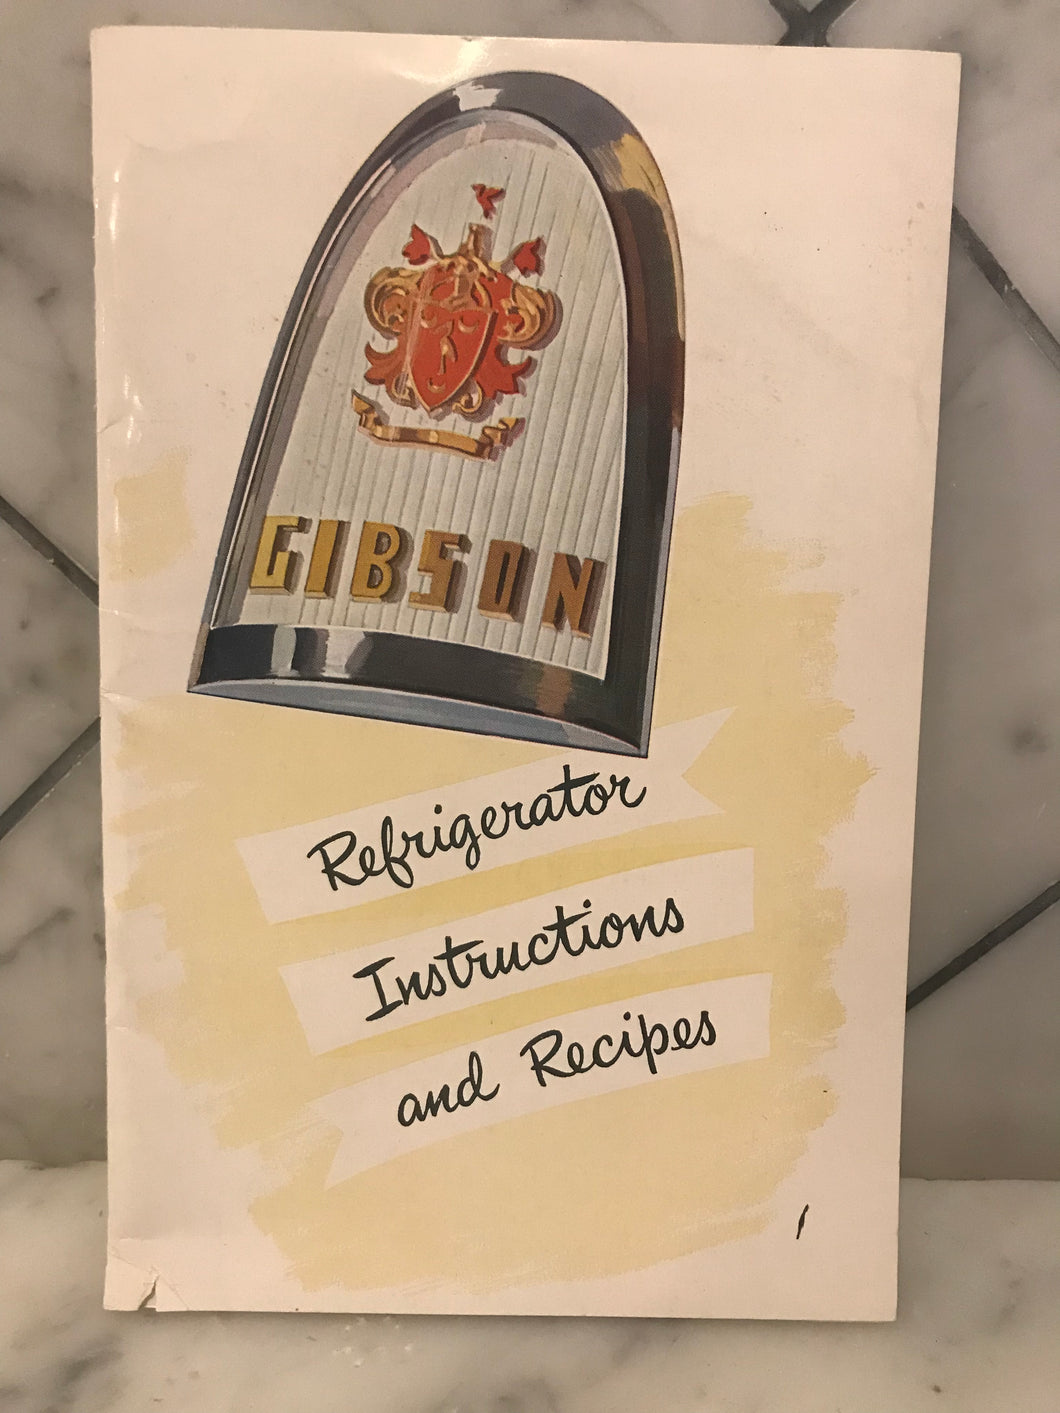 Gibson Refrigerator Instructions and Recipes